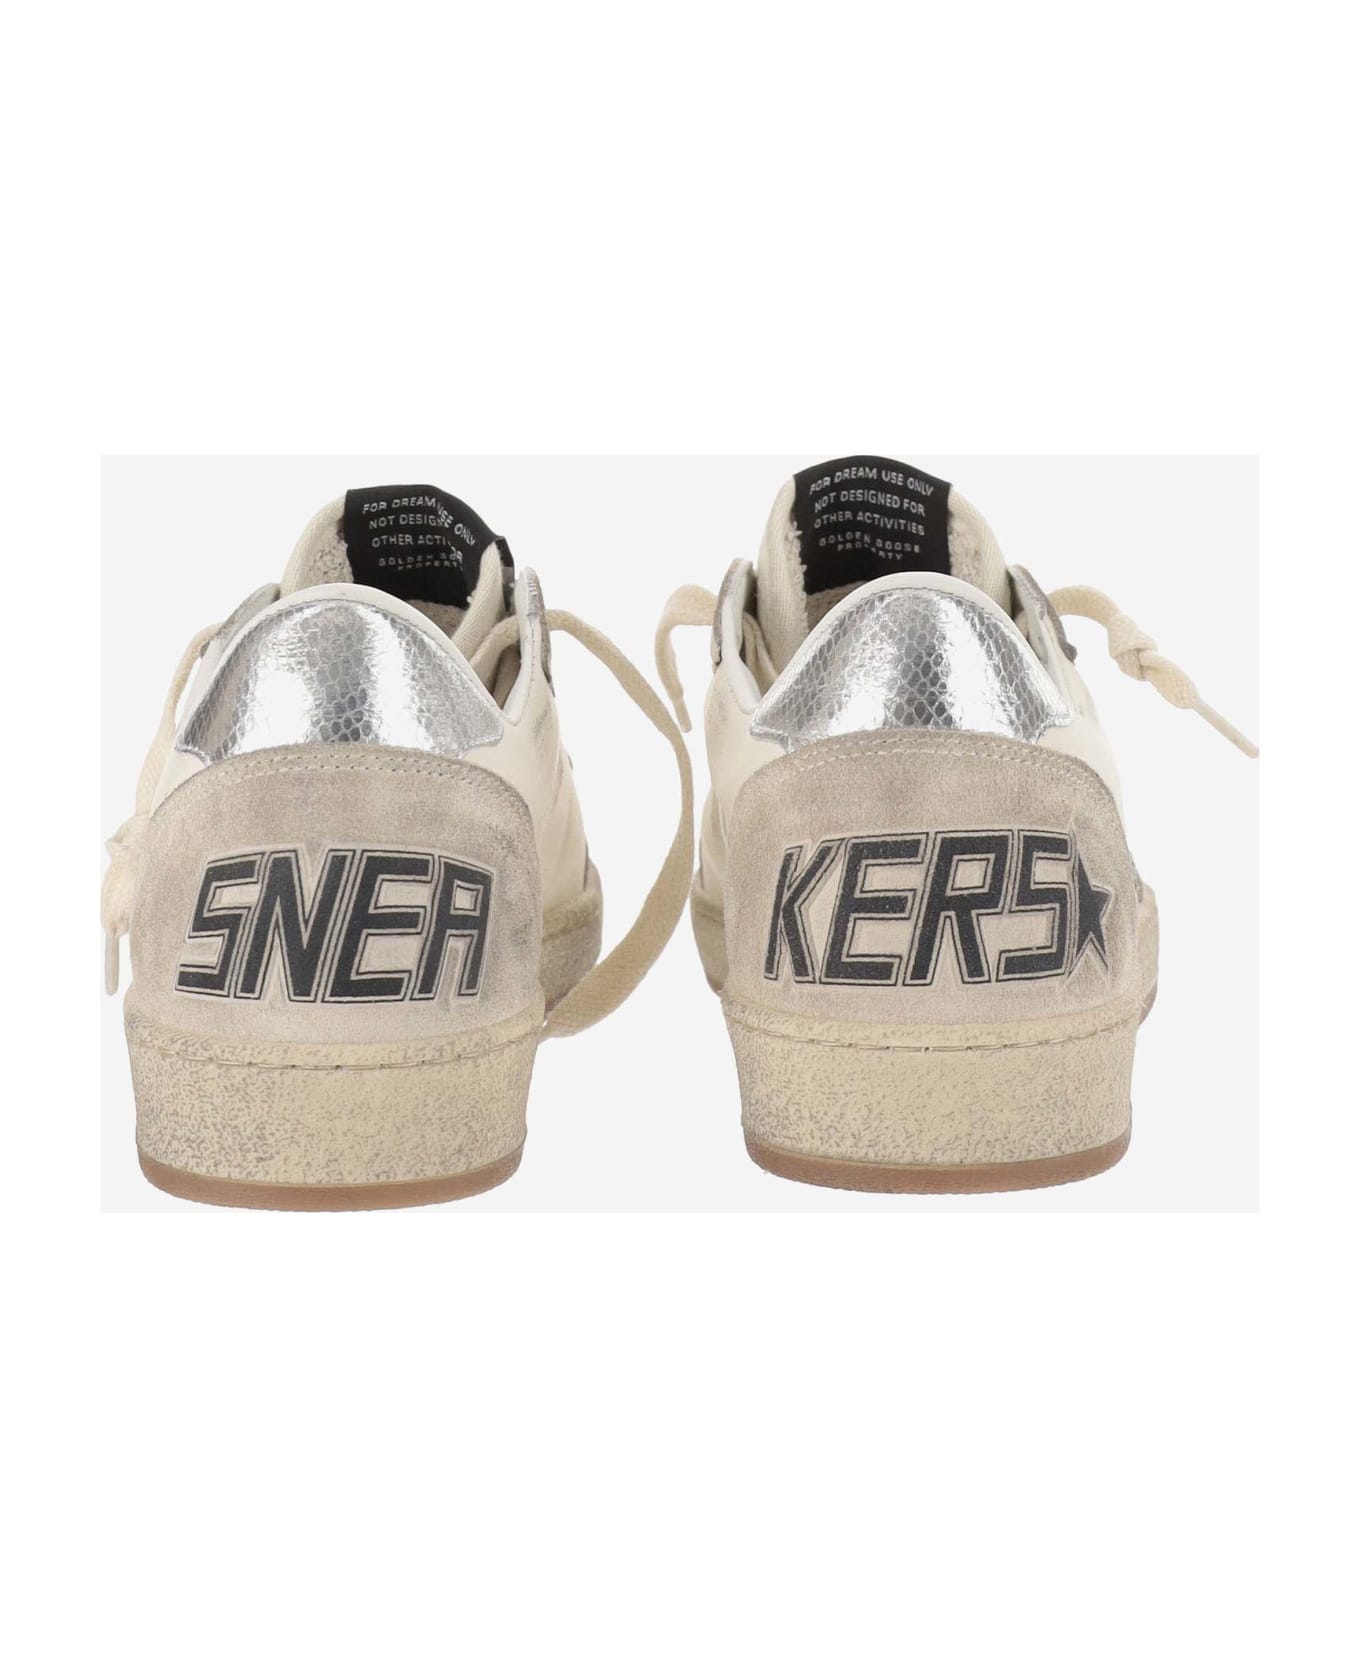 Golden Goose Ball Star Sneakers - White/seedpearl/silver